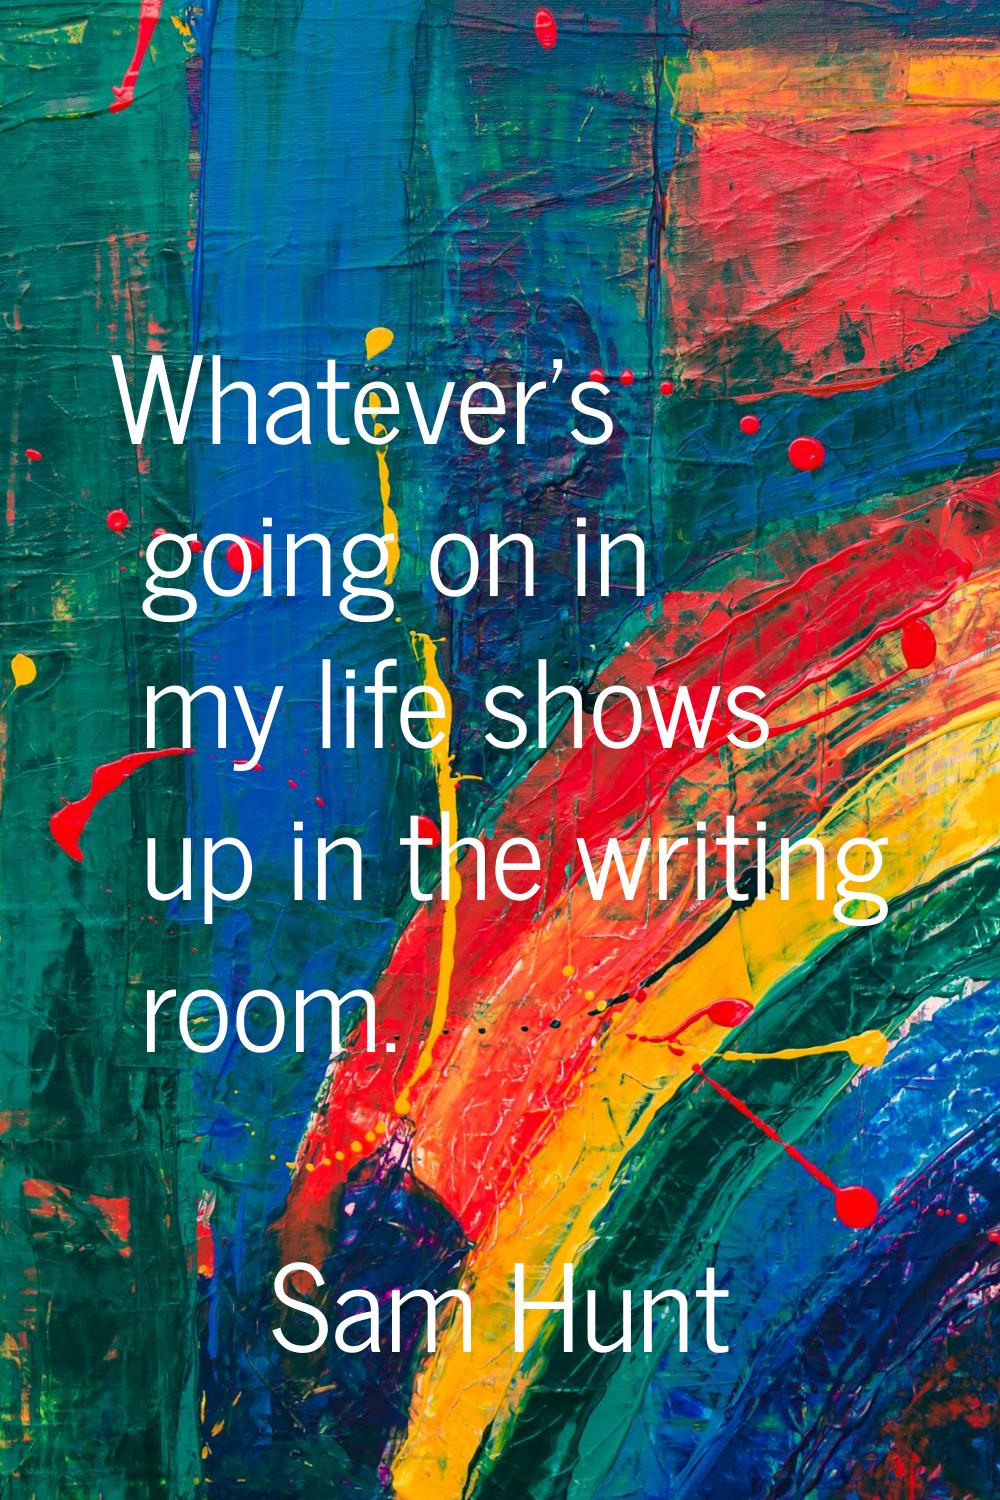 Whatever's going on in my life shows up in the writing room.